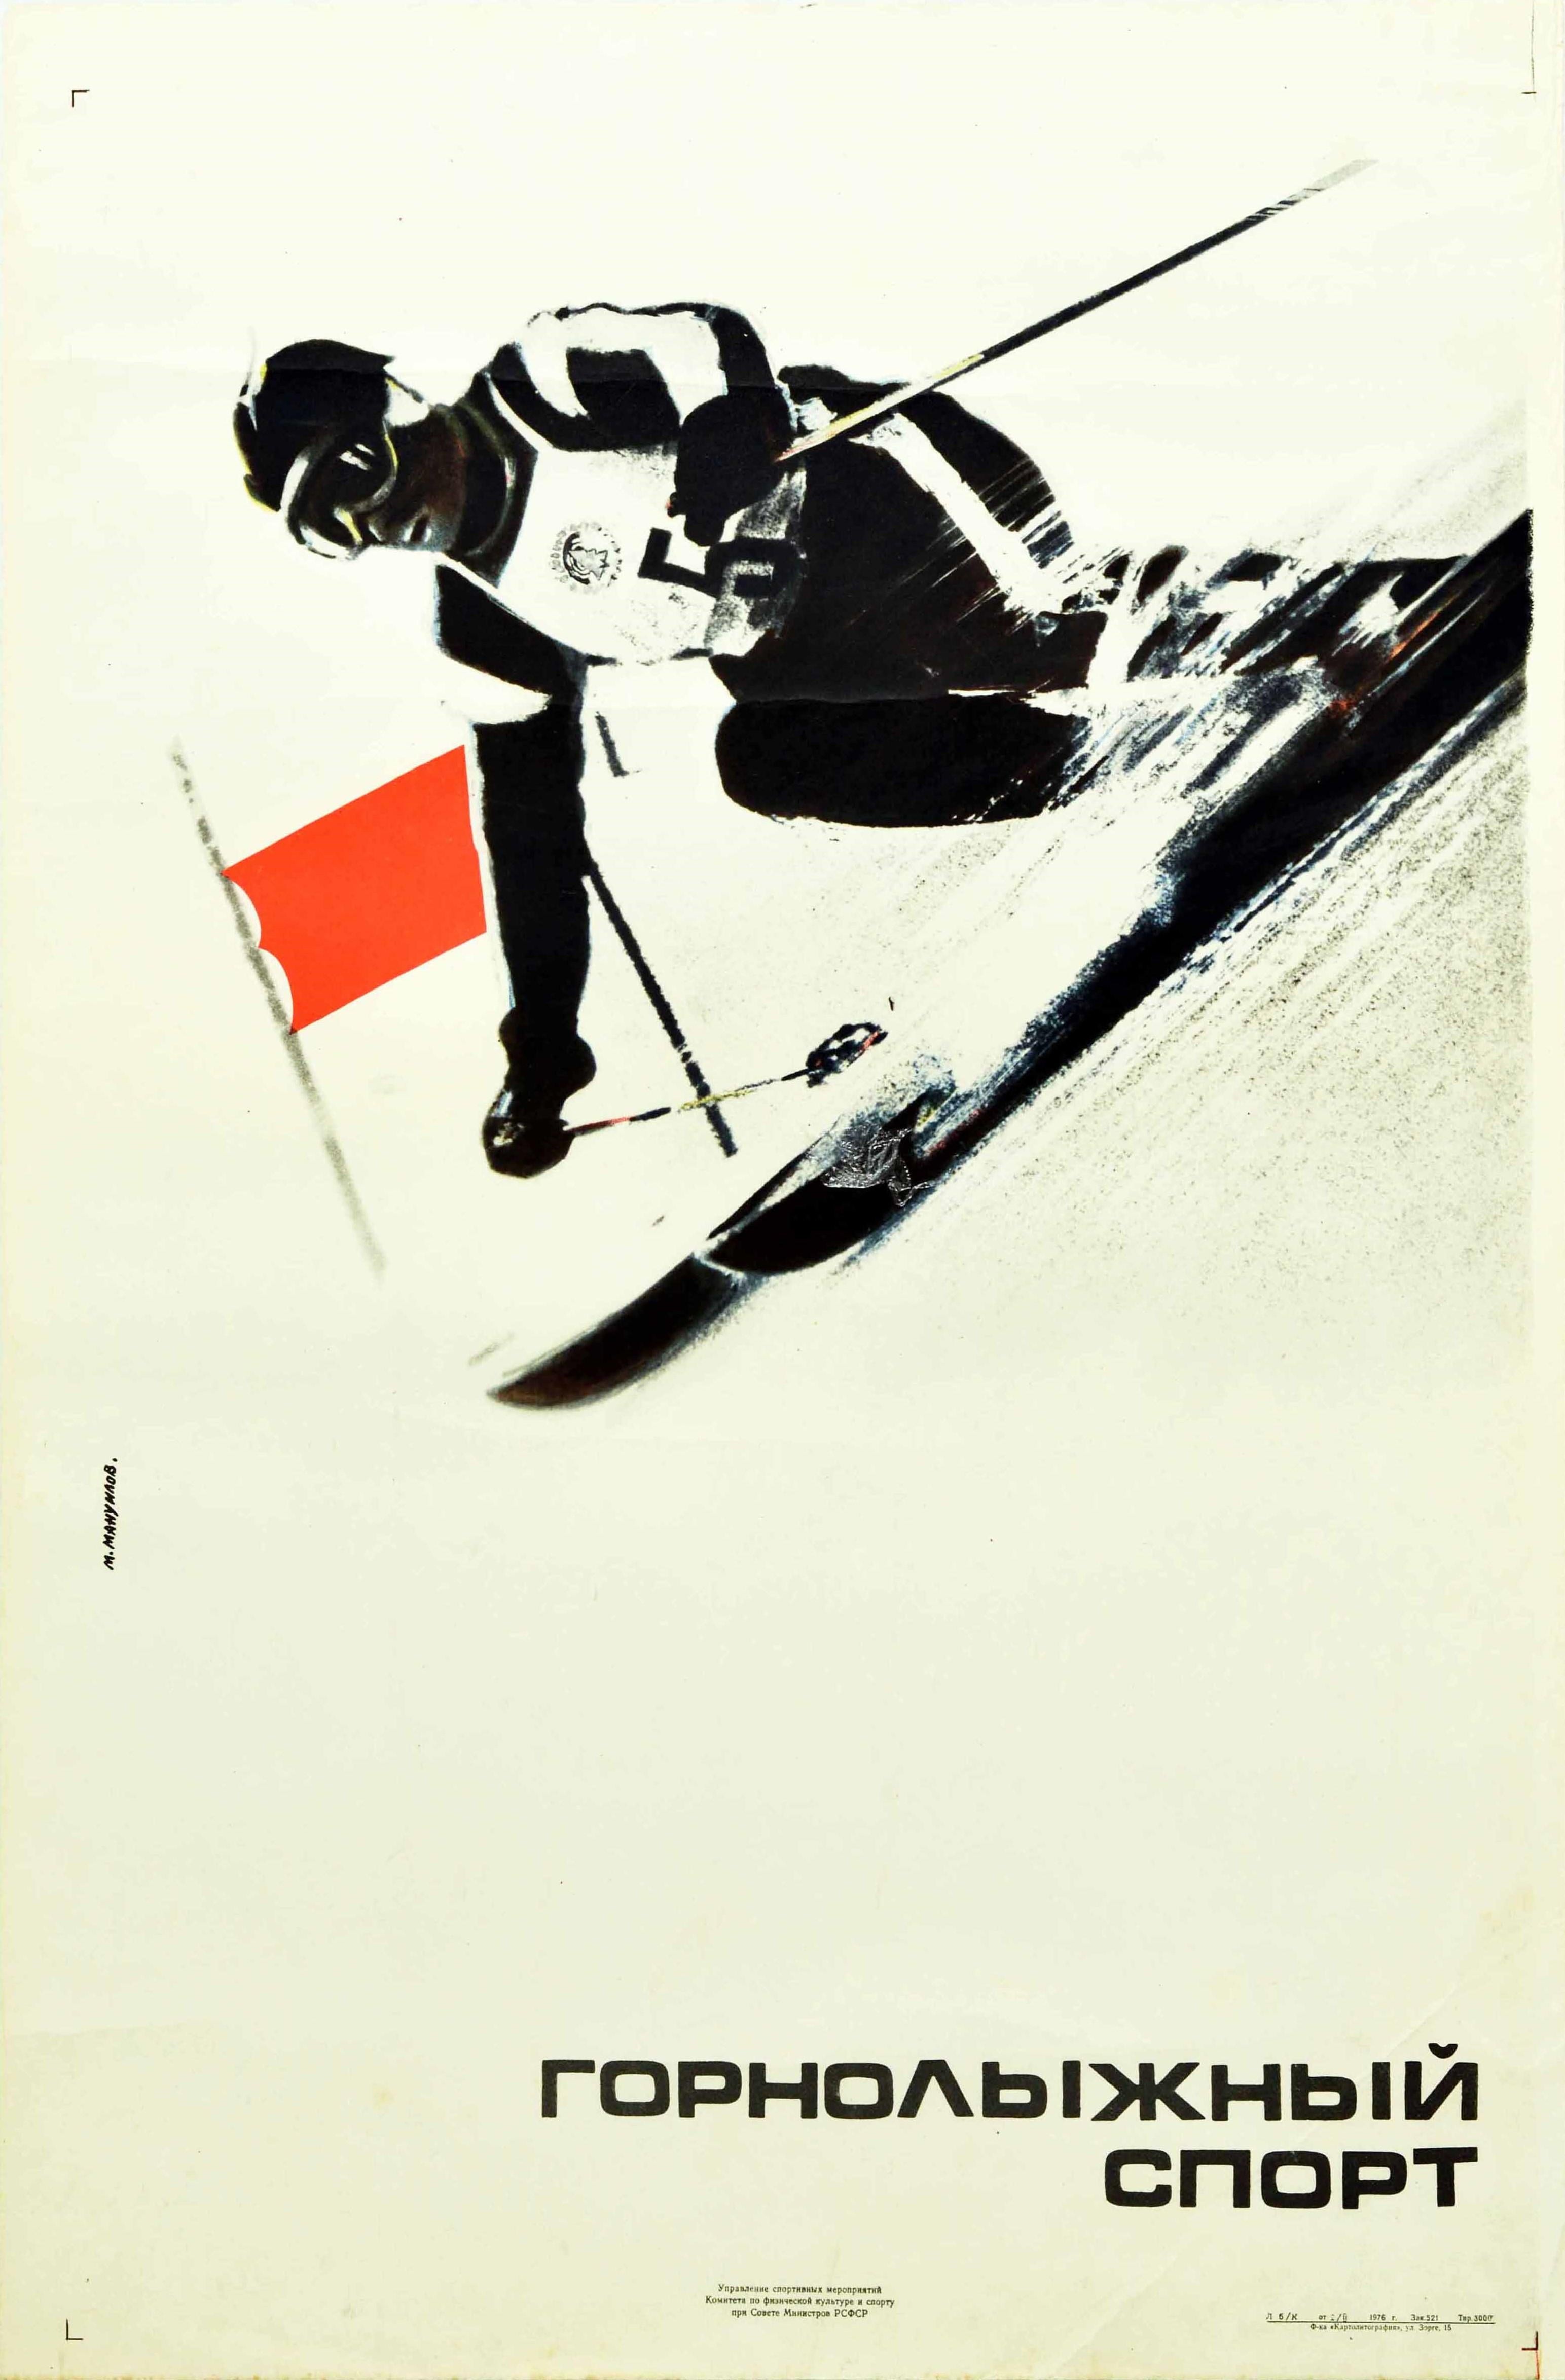 Original vintage skiing winter sport poster featuring a dynamic illustration of a skier in ski gear depicted in black and white zooming down a snowy slope at speed past a red flag with the title in bold black letters below. Issued by the Department